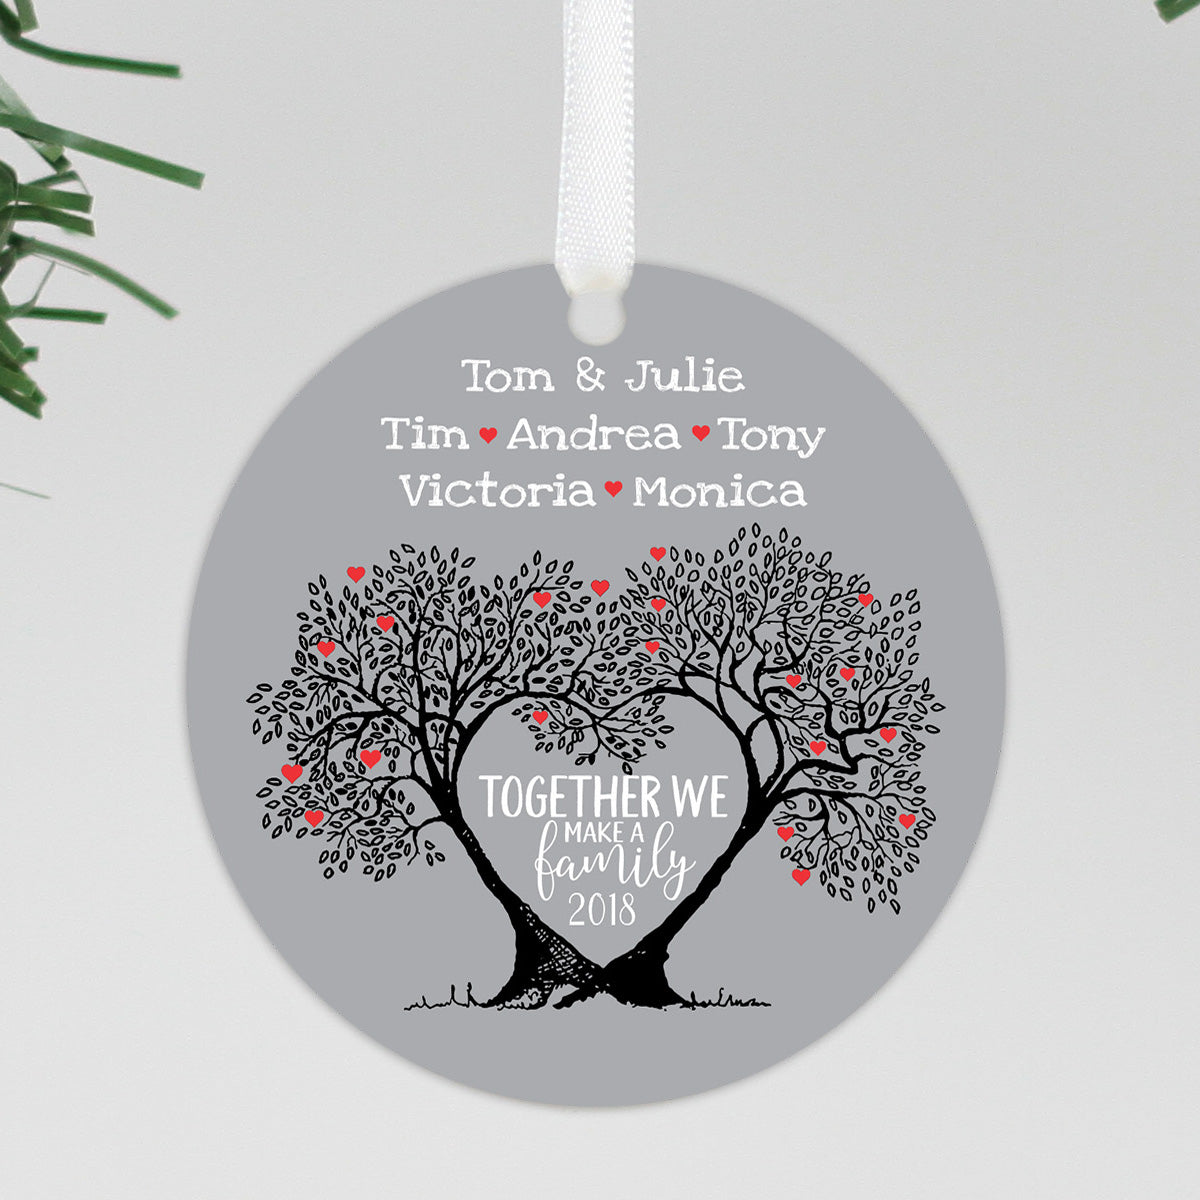 ORN08-Our Family - Personalized Heart Ornament